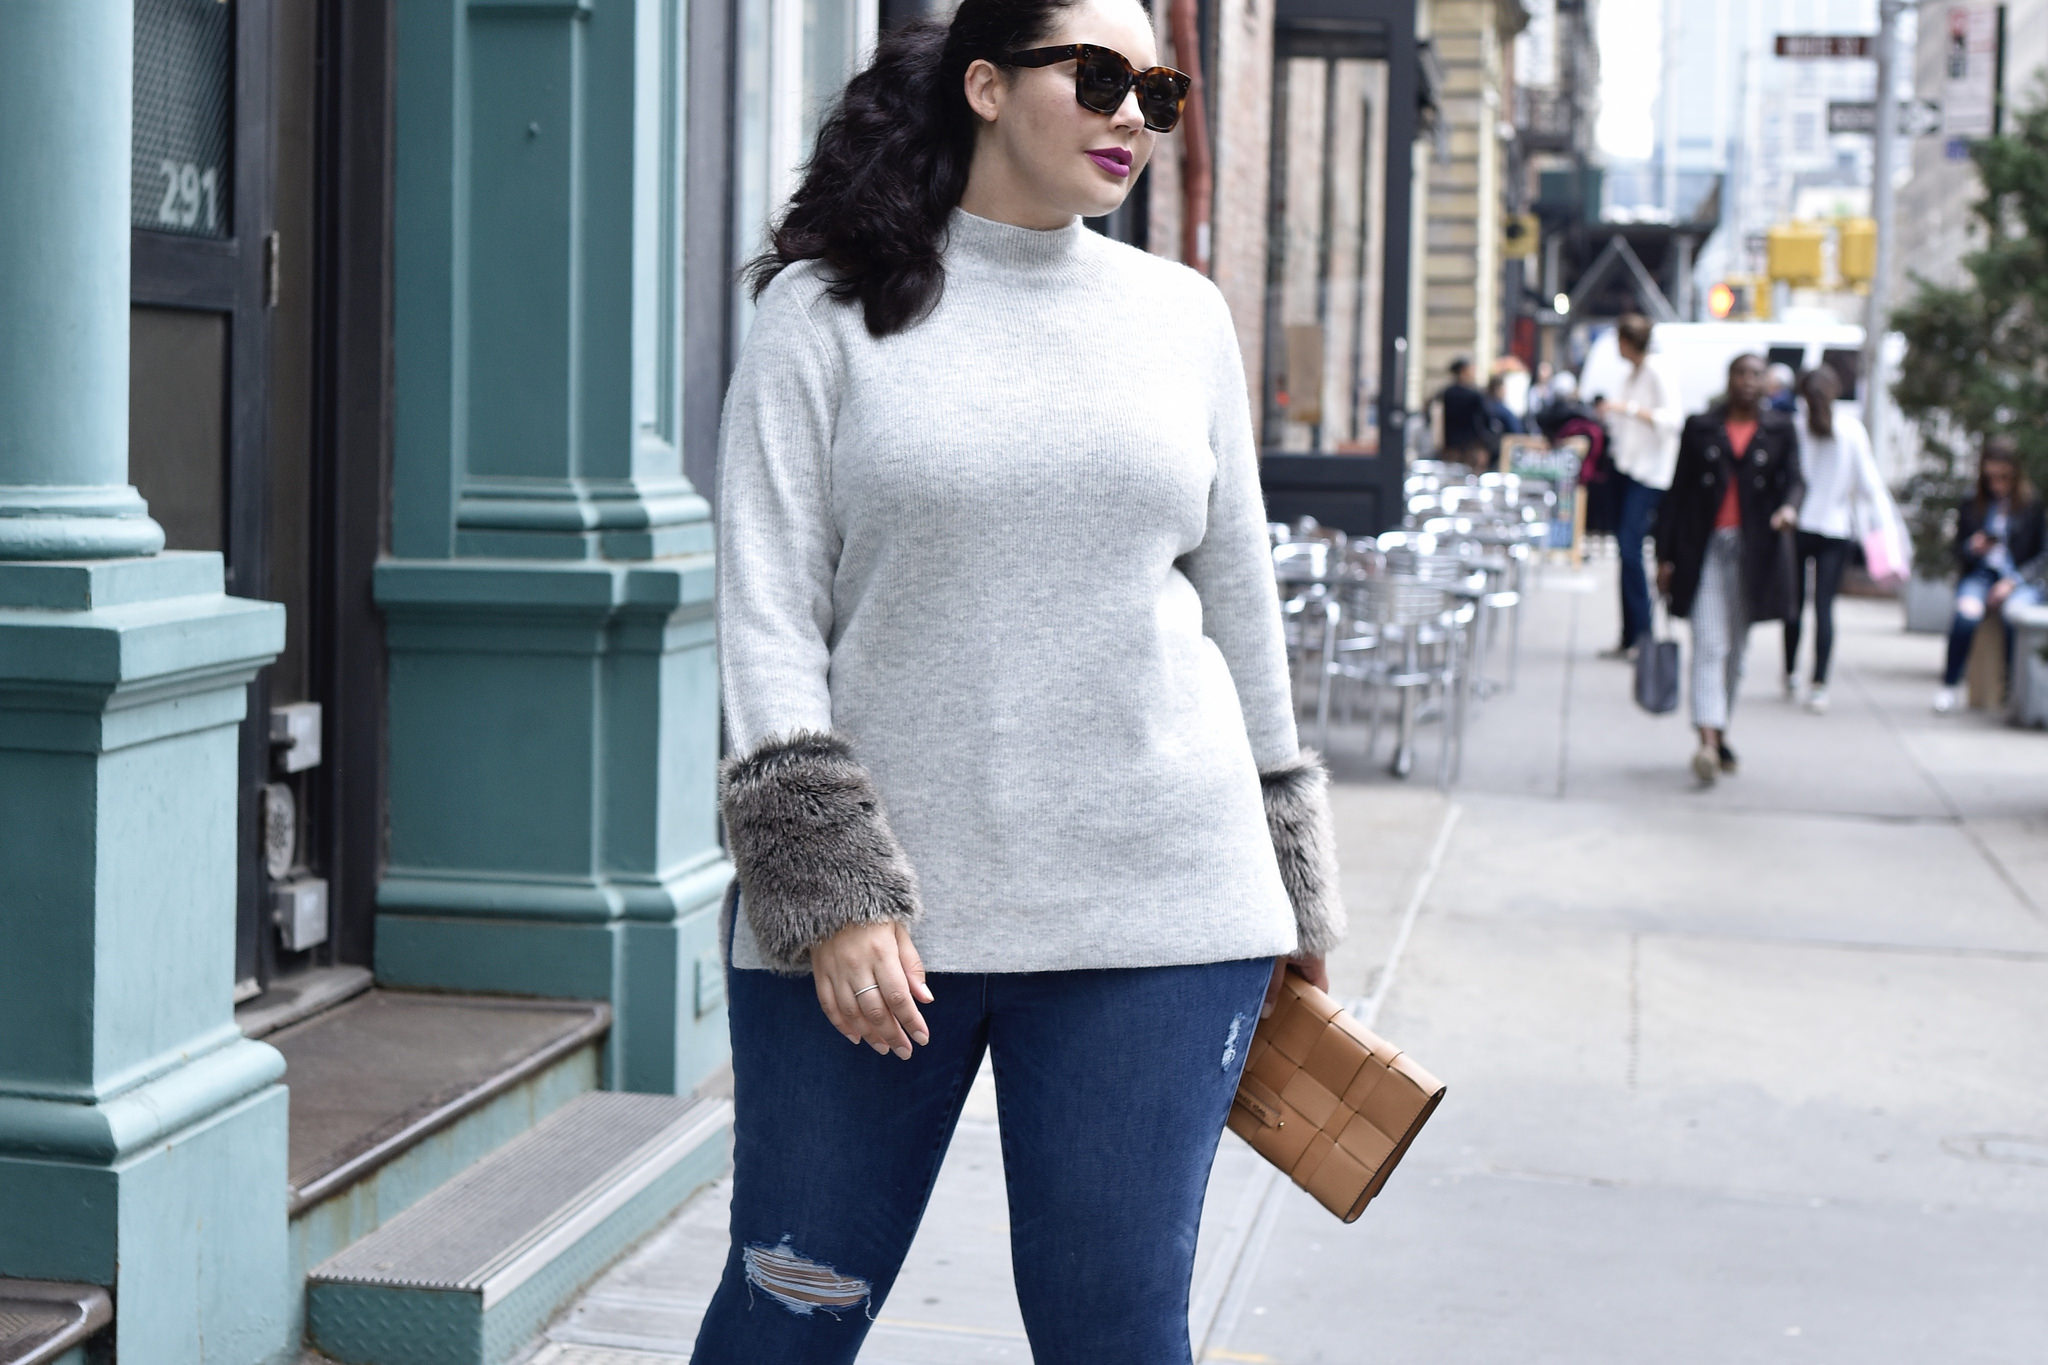 A Winter Essential With An Unexpected Detail Via @GirlWithCurves #style #fashion #outfits #blogger Girl With Curves x Lane Bryant #GWCxLB